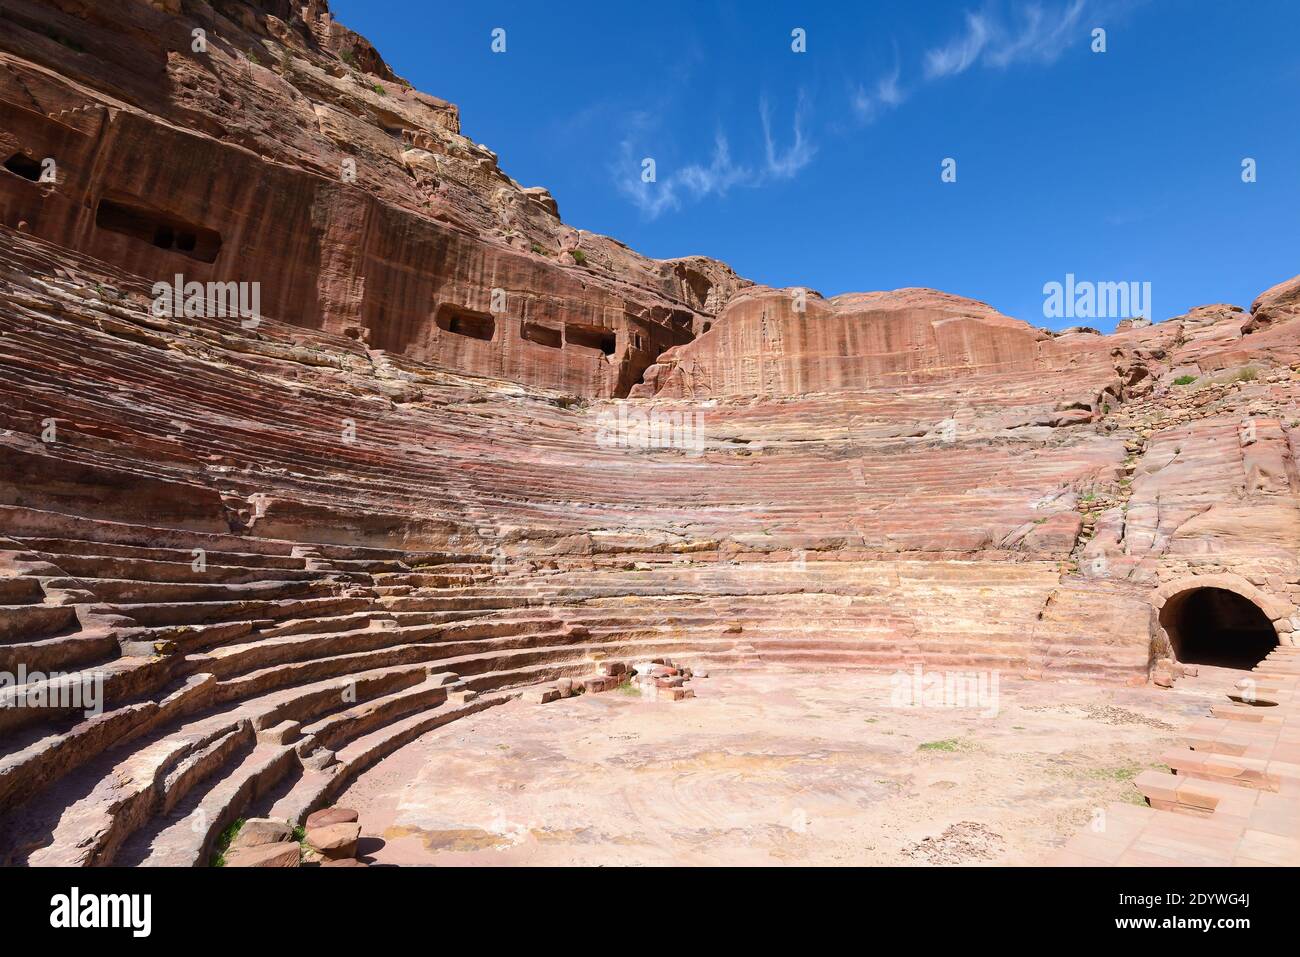 Petra Theater carved out in rock at Petra, Jordan. Old amphitheater in hellenistic style. Nabatean built amphitheatre. Stock Photo